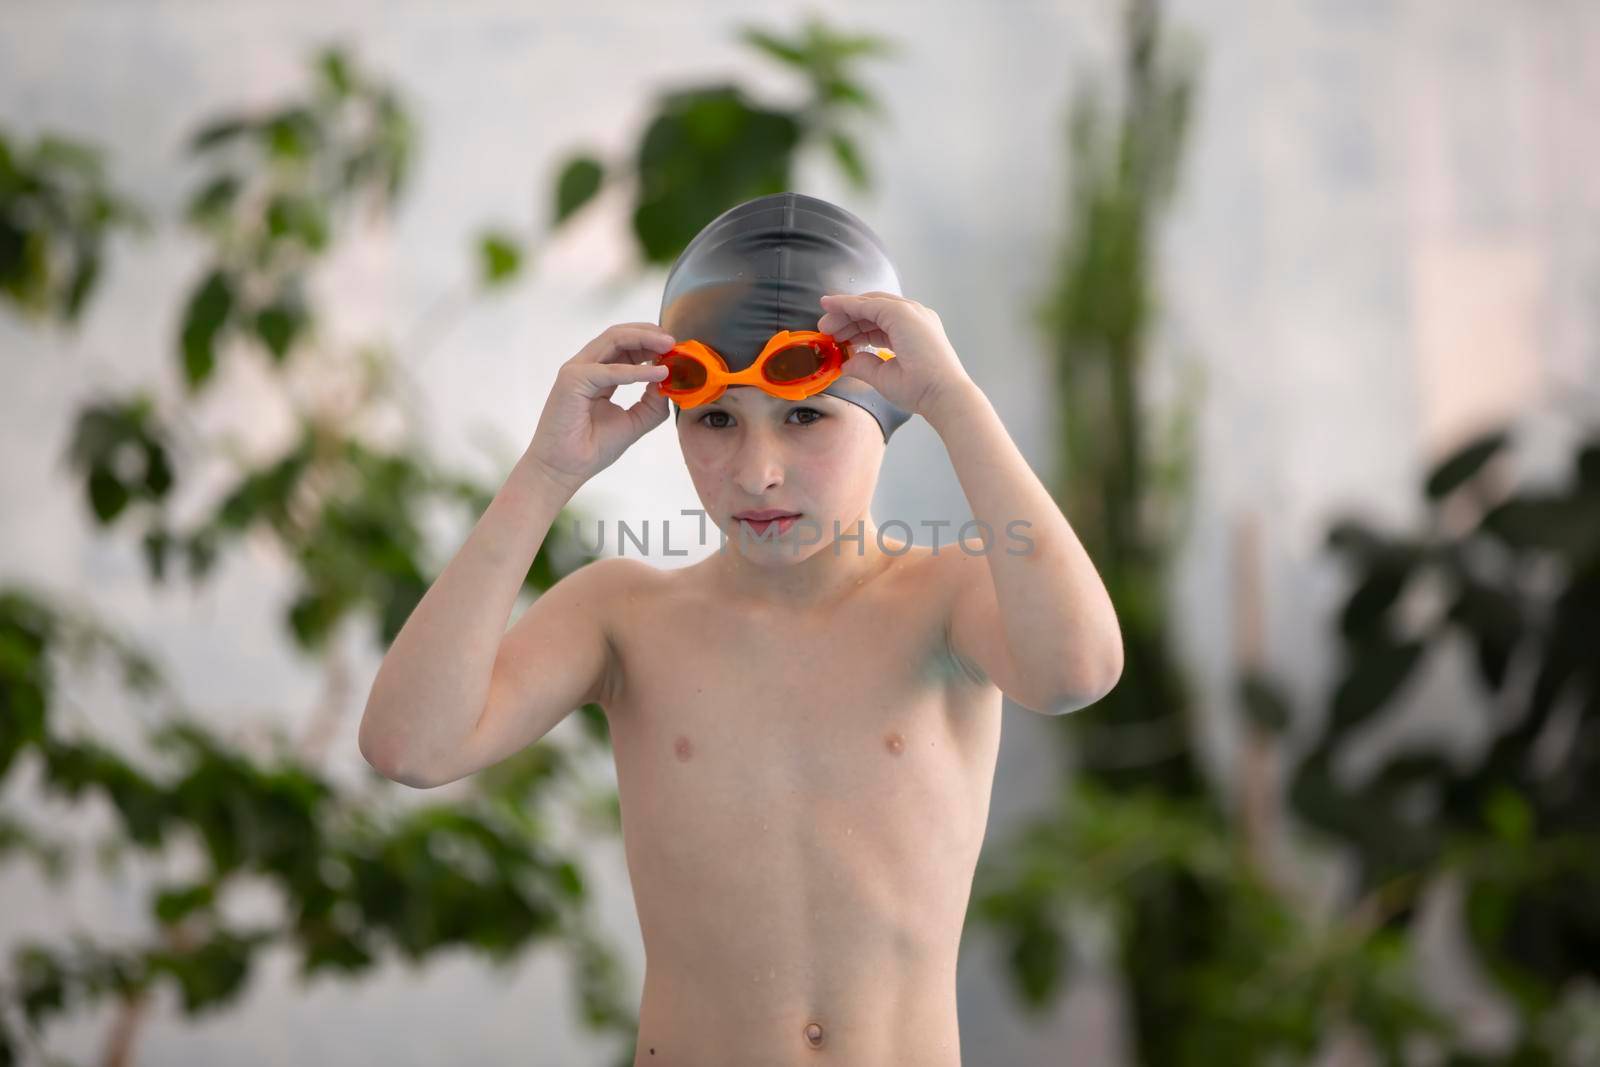 Boy in a swimming cap in the sports pool.